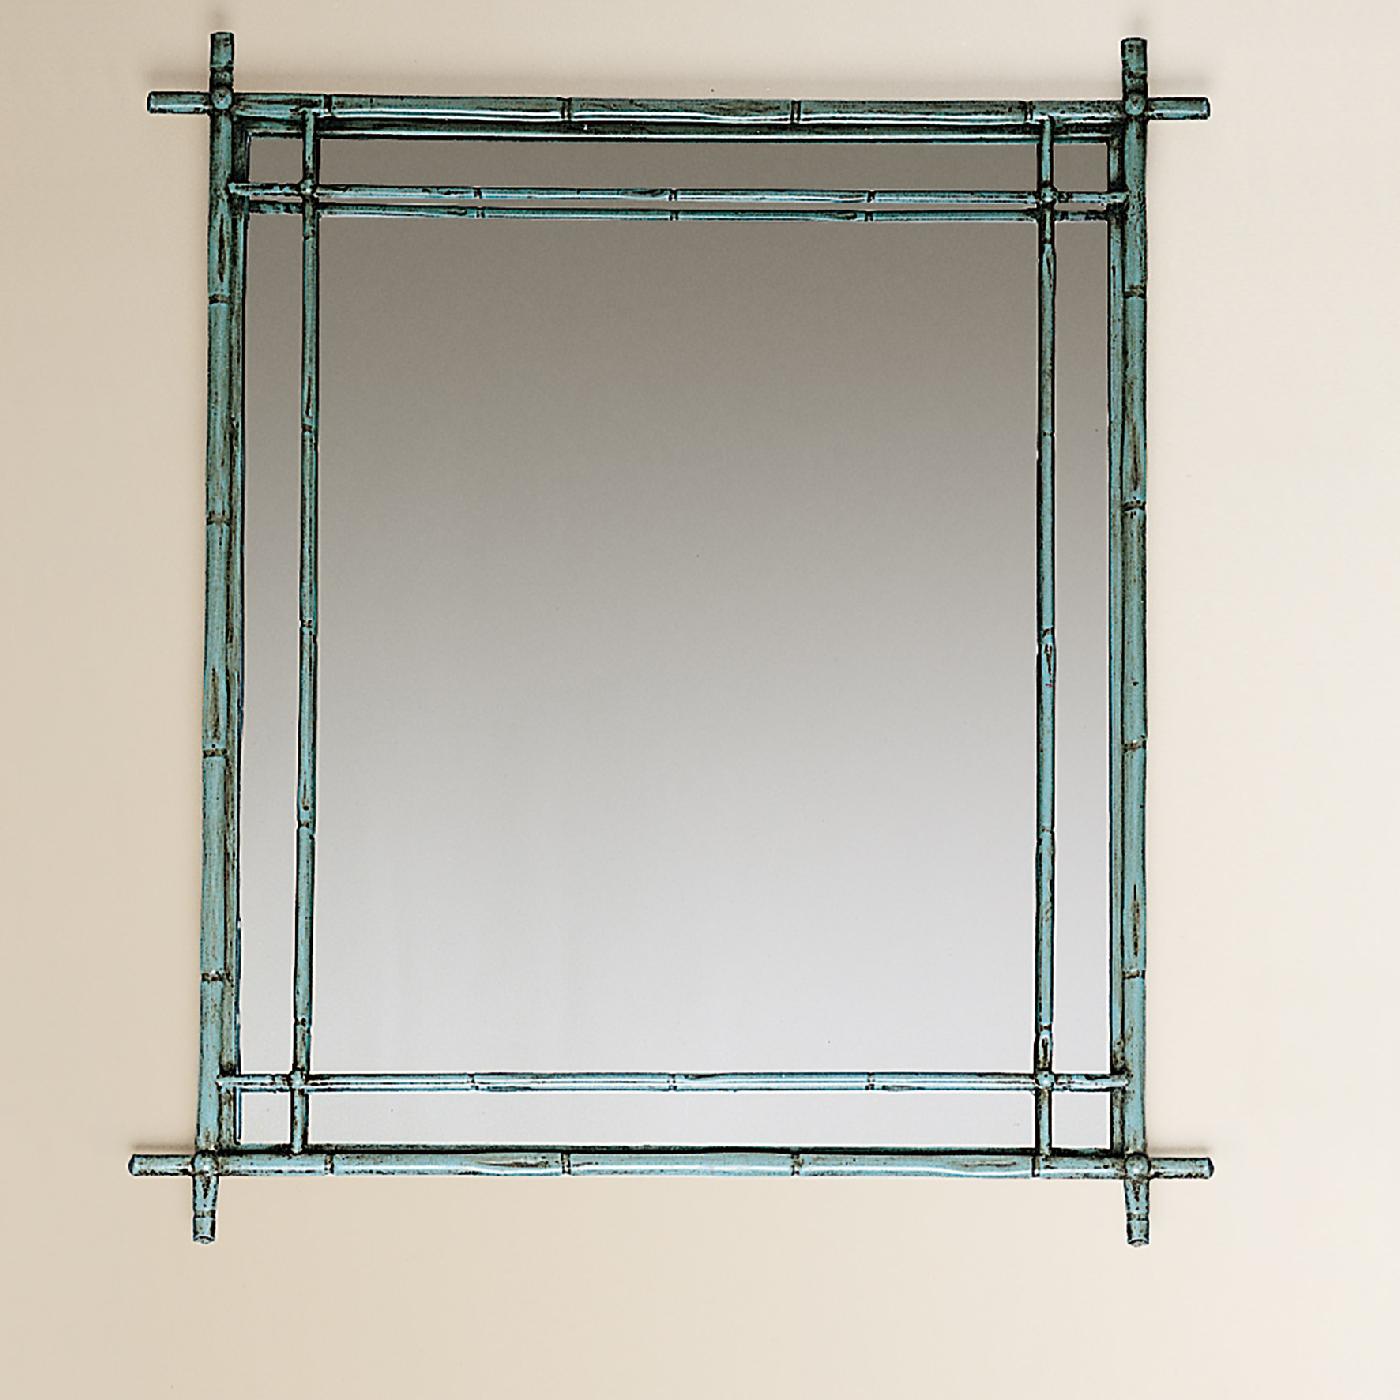 Timeless and elegant, this mirror will look stunning in any interior. A double decorative element divides the rectangular reflective surface while enclosing it in a delicate frame crafted of forged iron in the shape of slender bamboo sticks. Used to